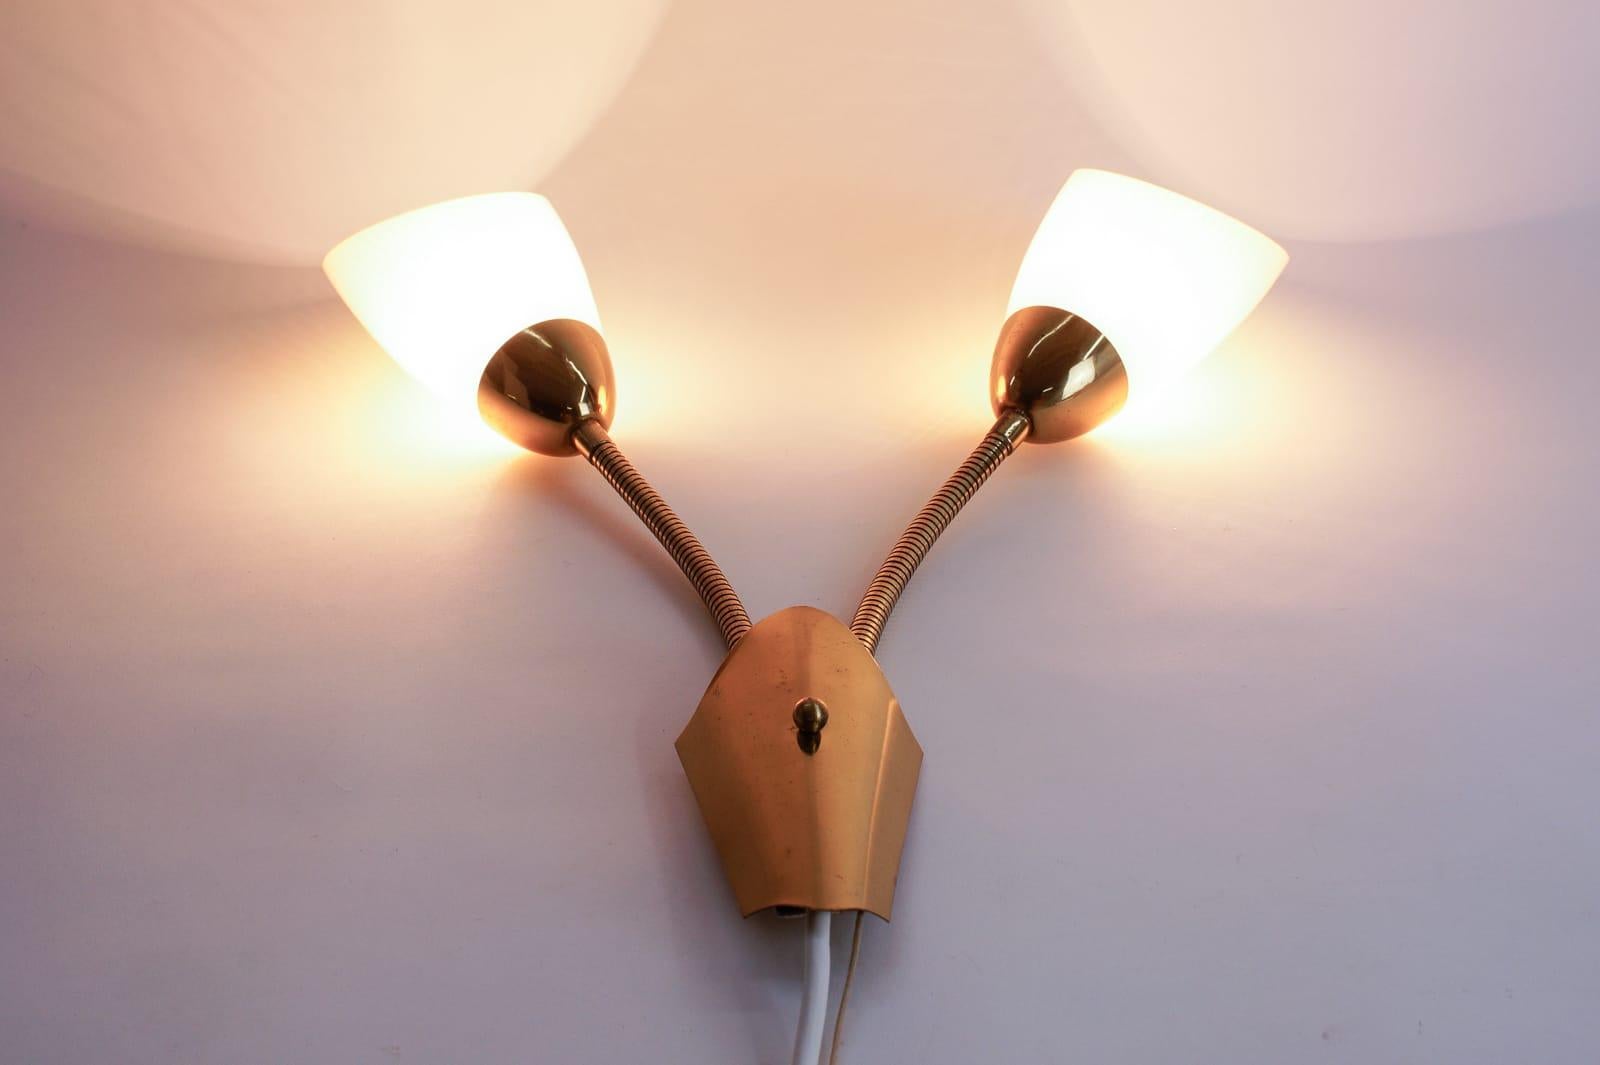 Mid-20th Century Pair of Double Arm Wall Lamps with Flexible Arms from the 1950s, Probably Italy For Sale